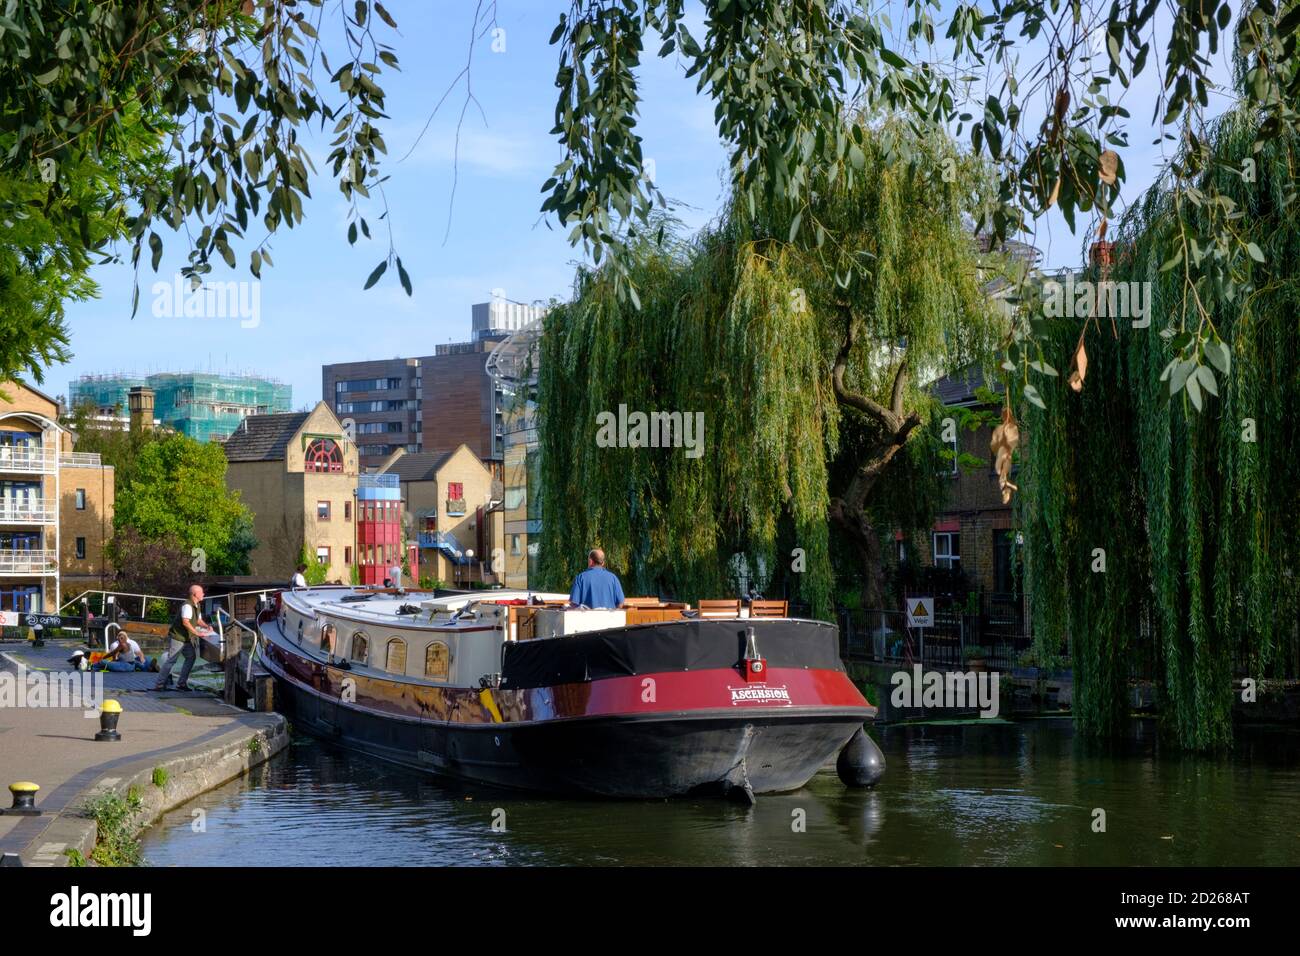 UK, London, Canal barge at the Kentish Town Lock, a lock gate on the Regents Canal, public footpath, summer, urban skyline, tranquil scene Stock Photo